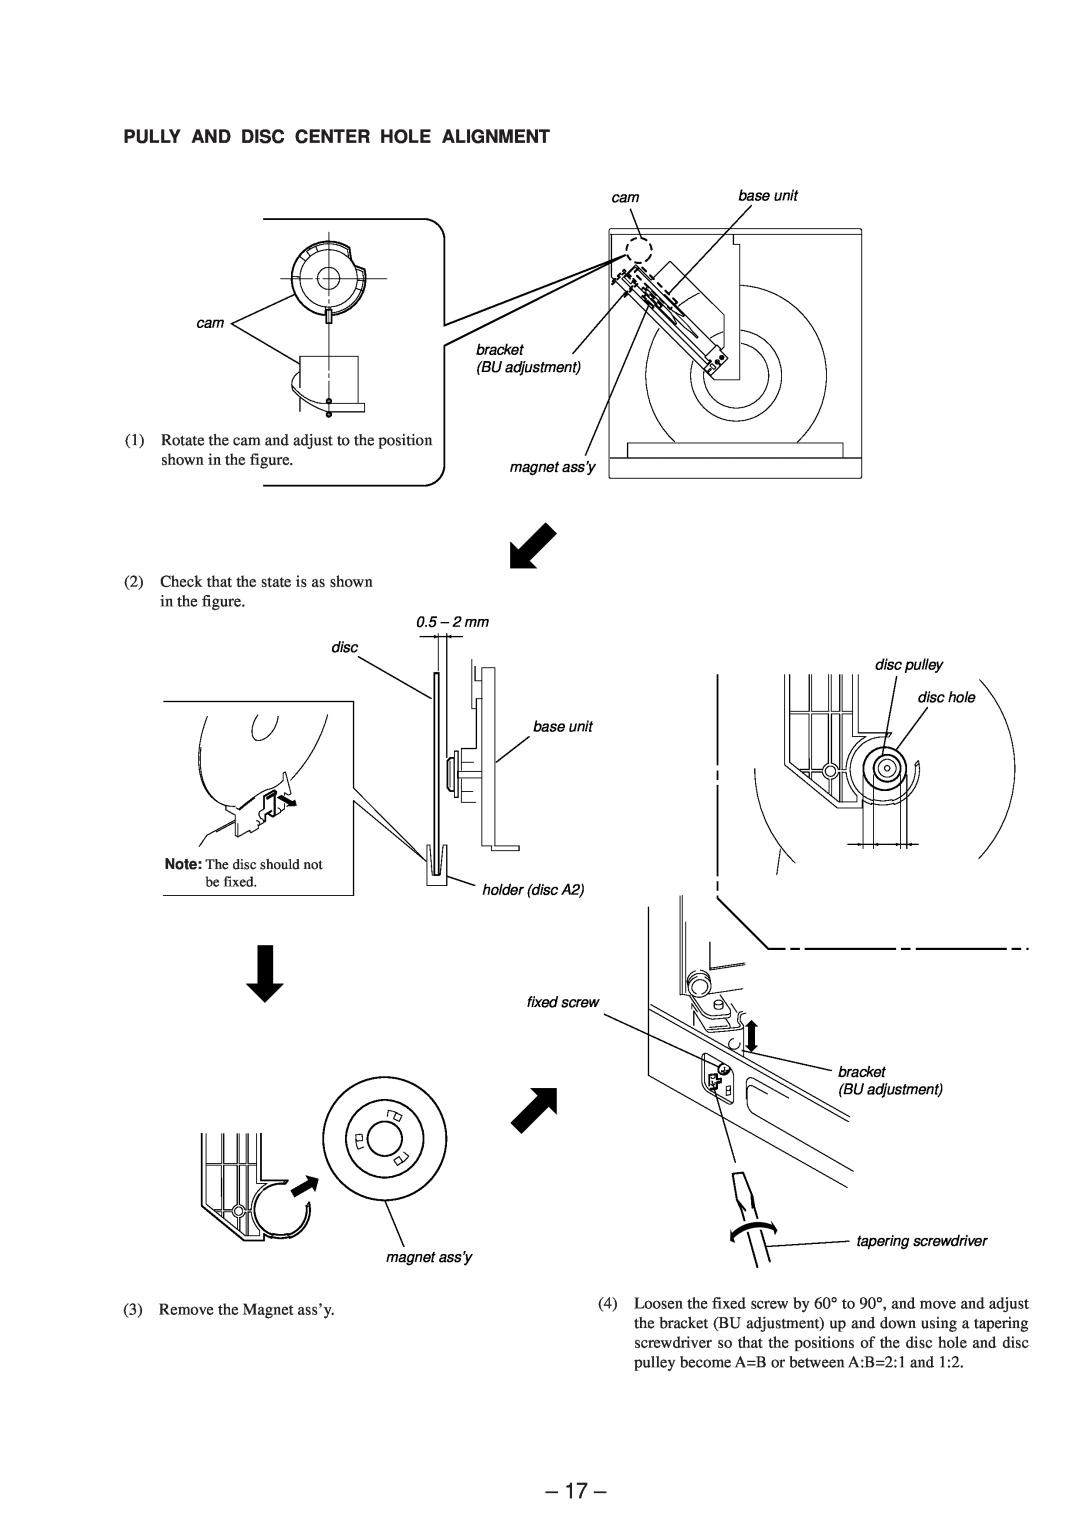 Sony Ericsson CDP-CX220 service manual Pully And Disc Center Hole Alignment 